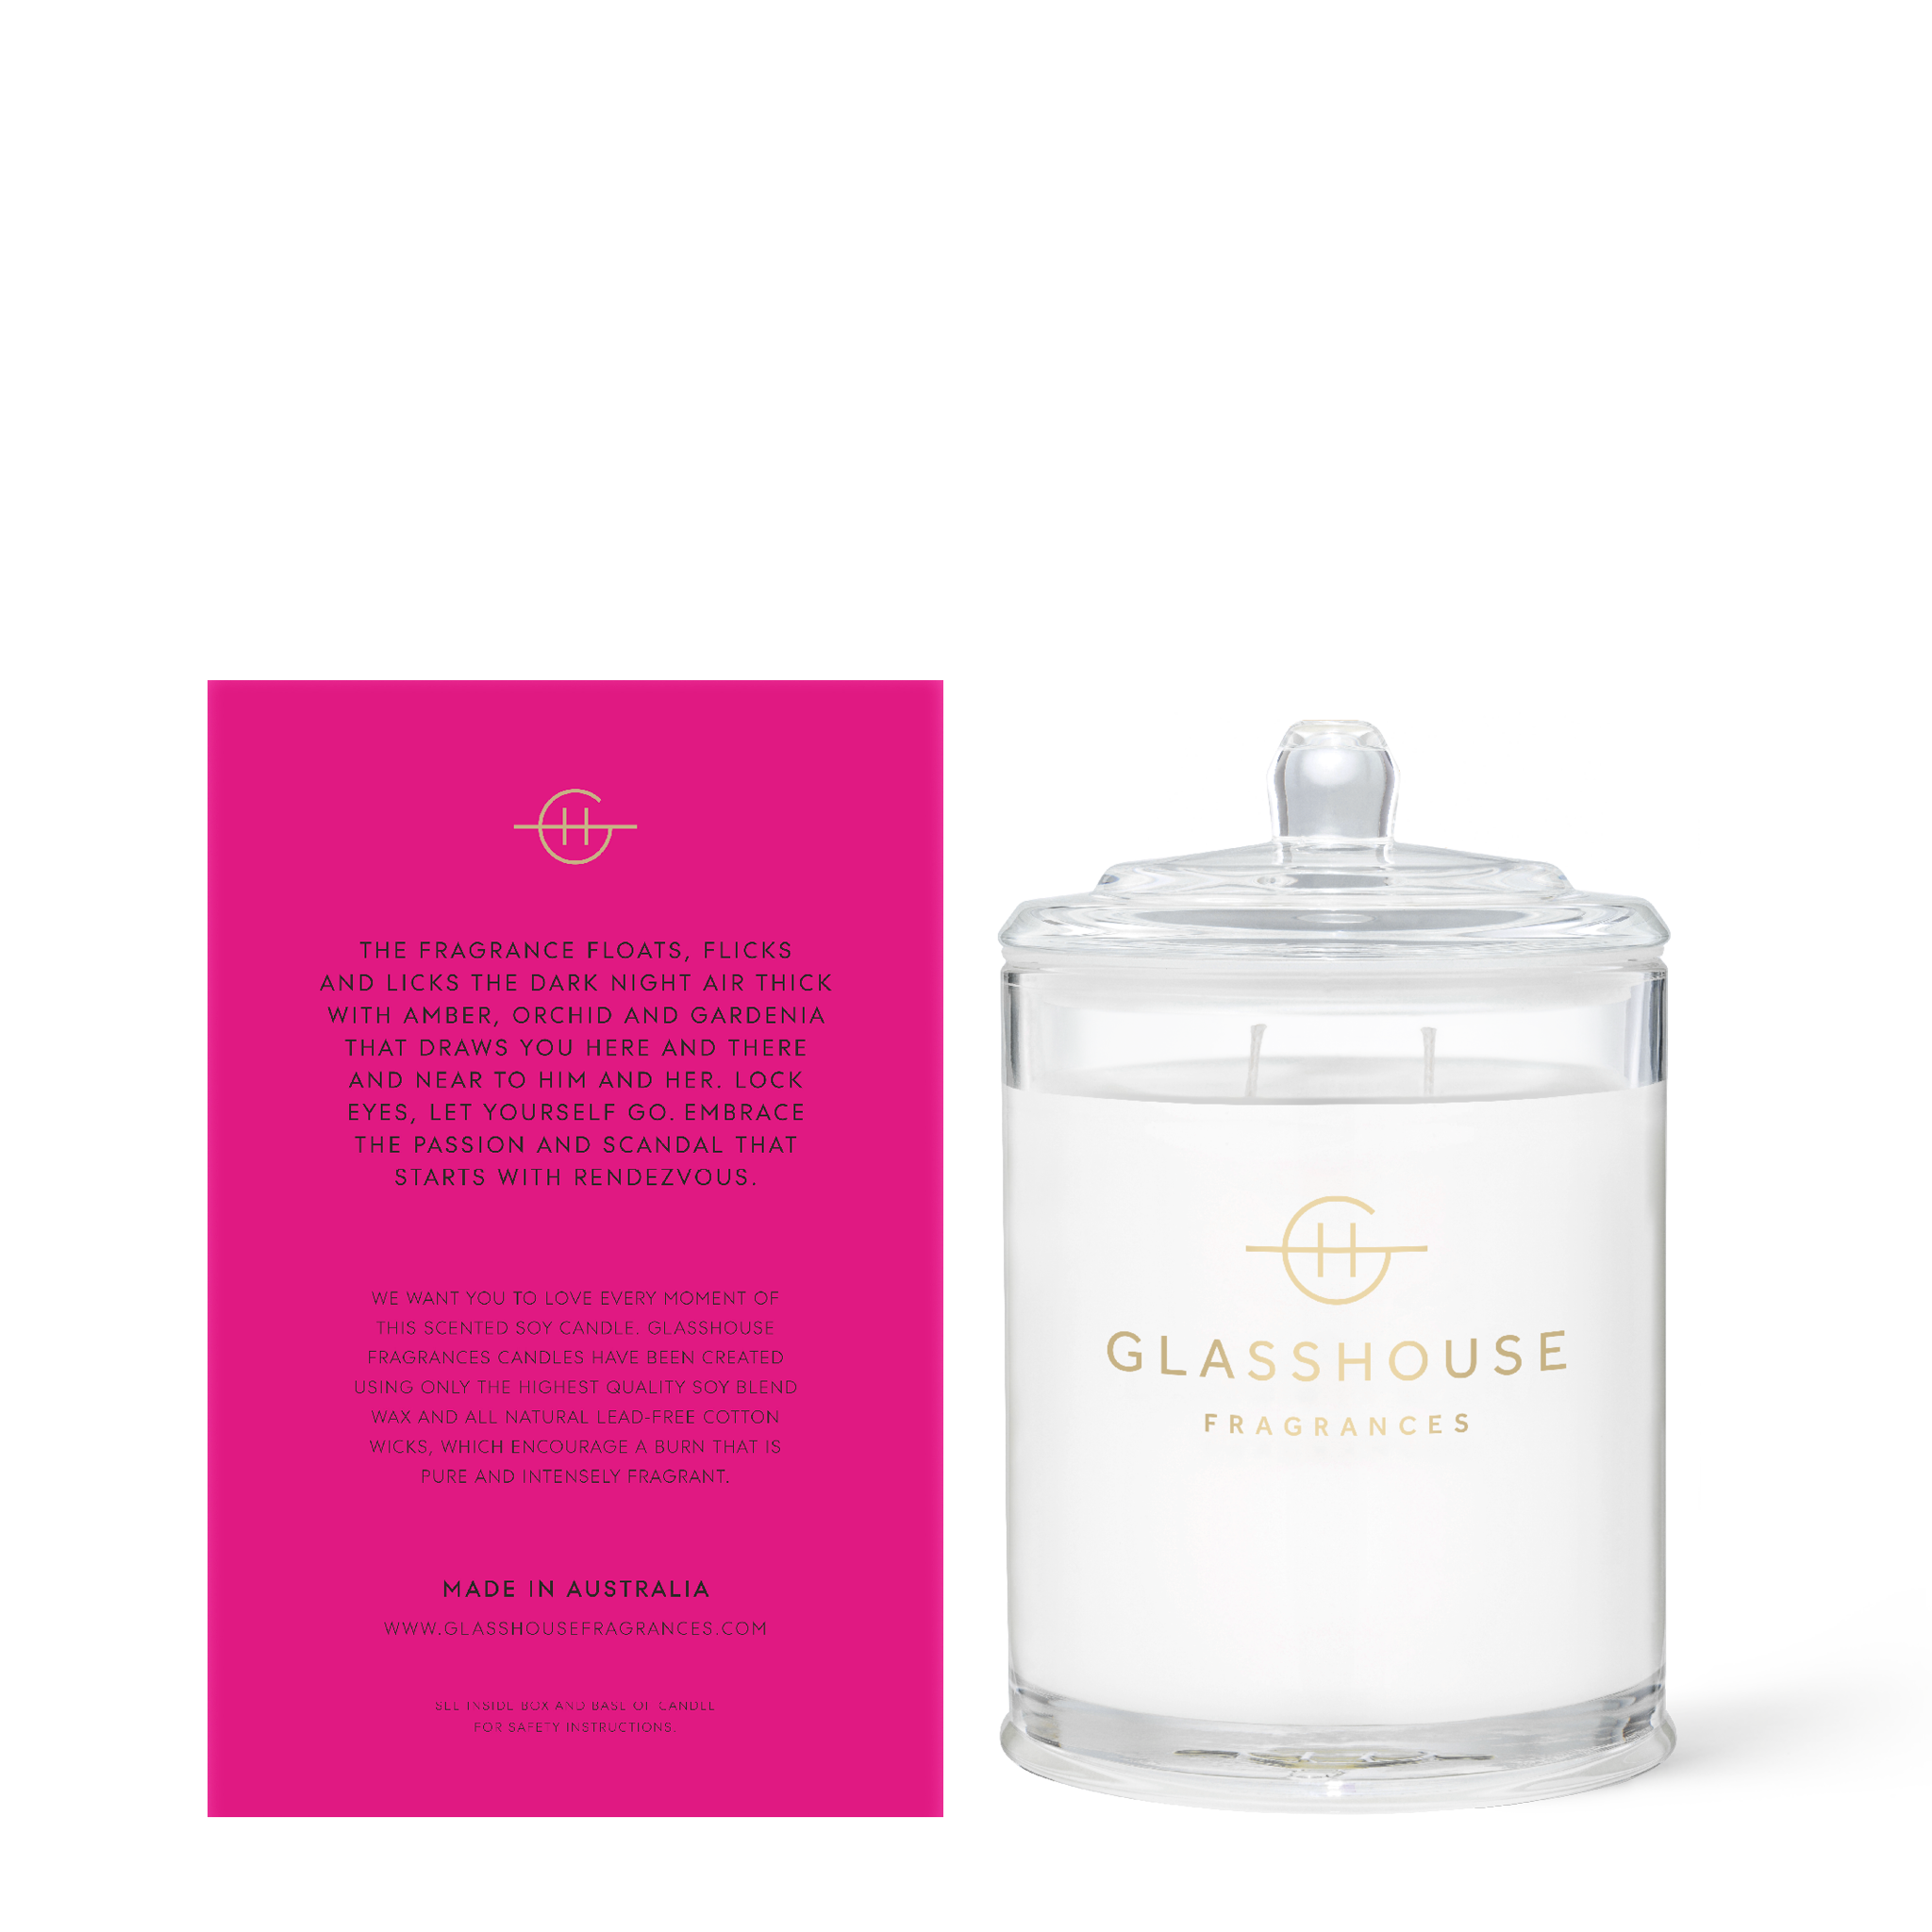 Glasshouse Fragrances Rendevous Amber and Orchid 380g Soy Candle with box - back of product shot